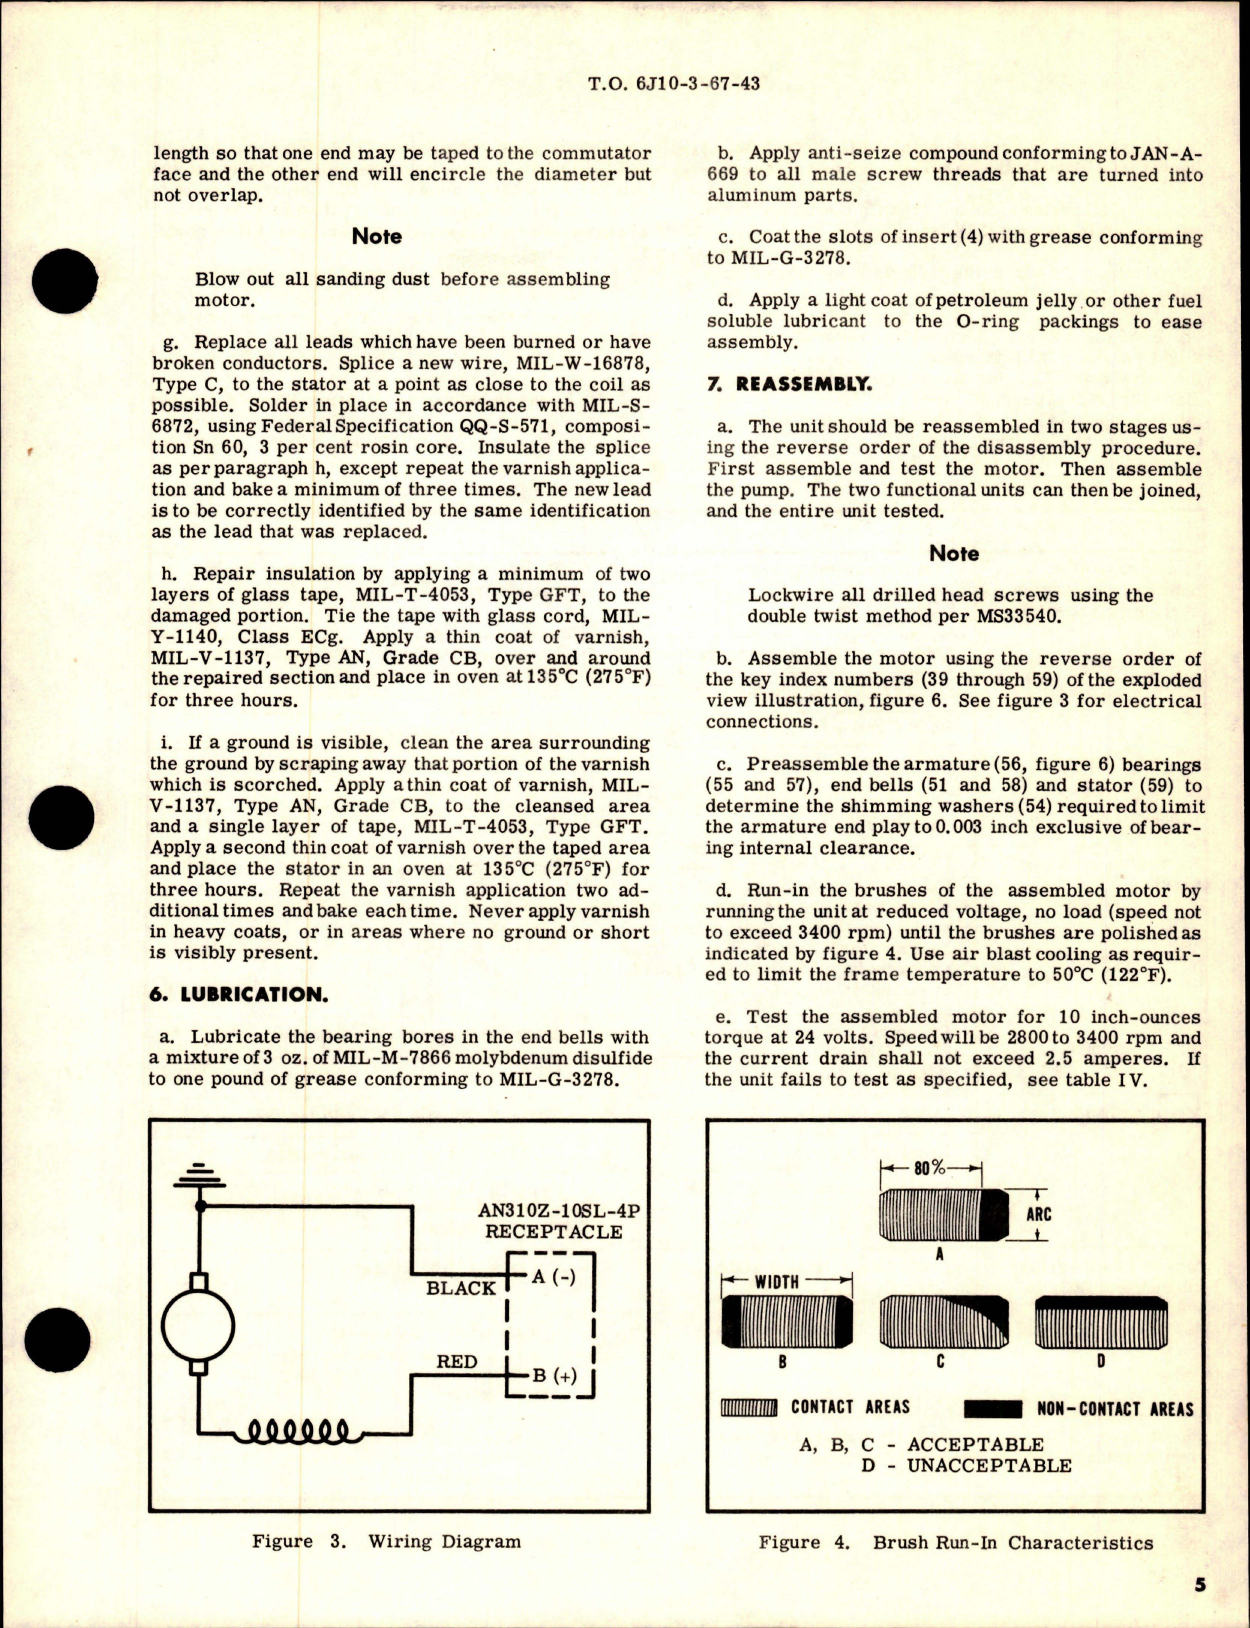 Sample page 5 from AirCorps Library document: Overhaul Instructions w Parts Breakdown for Fuel Line Transfer Pump - Series RG15150 